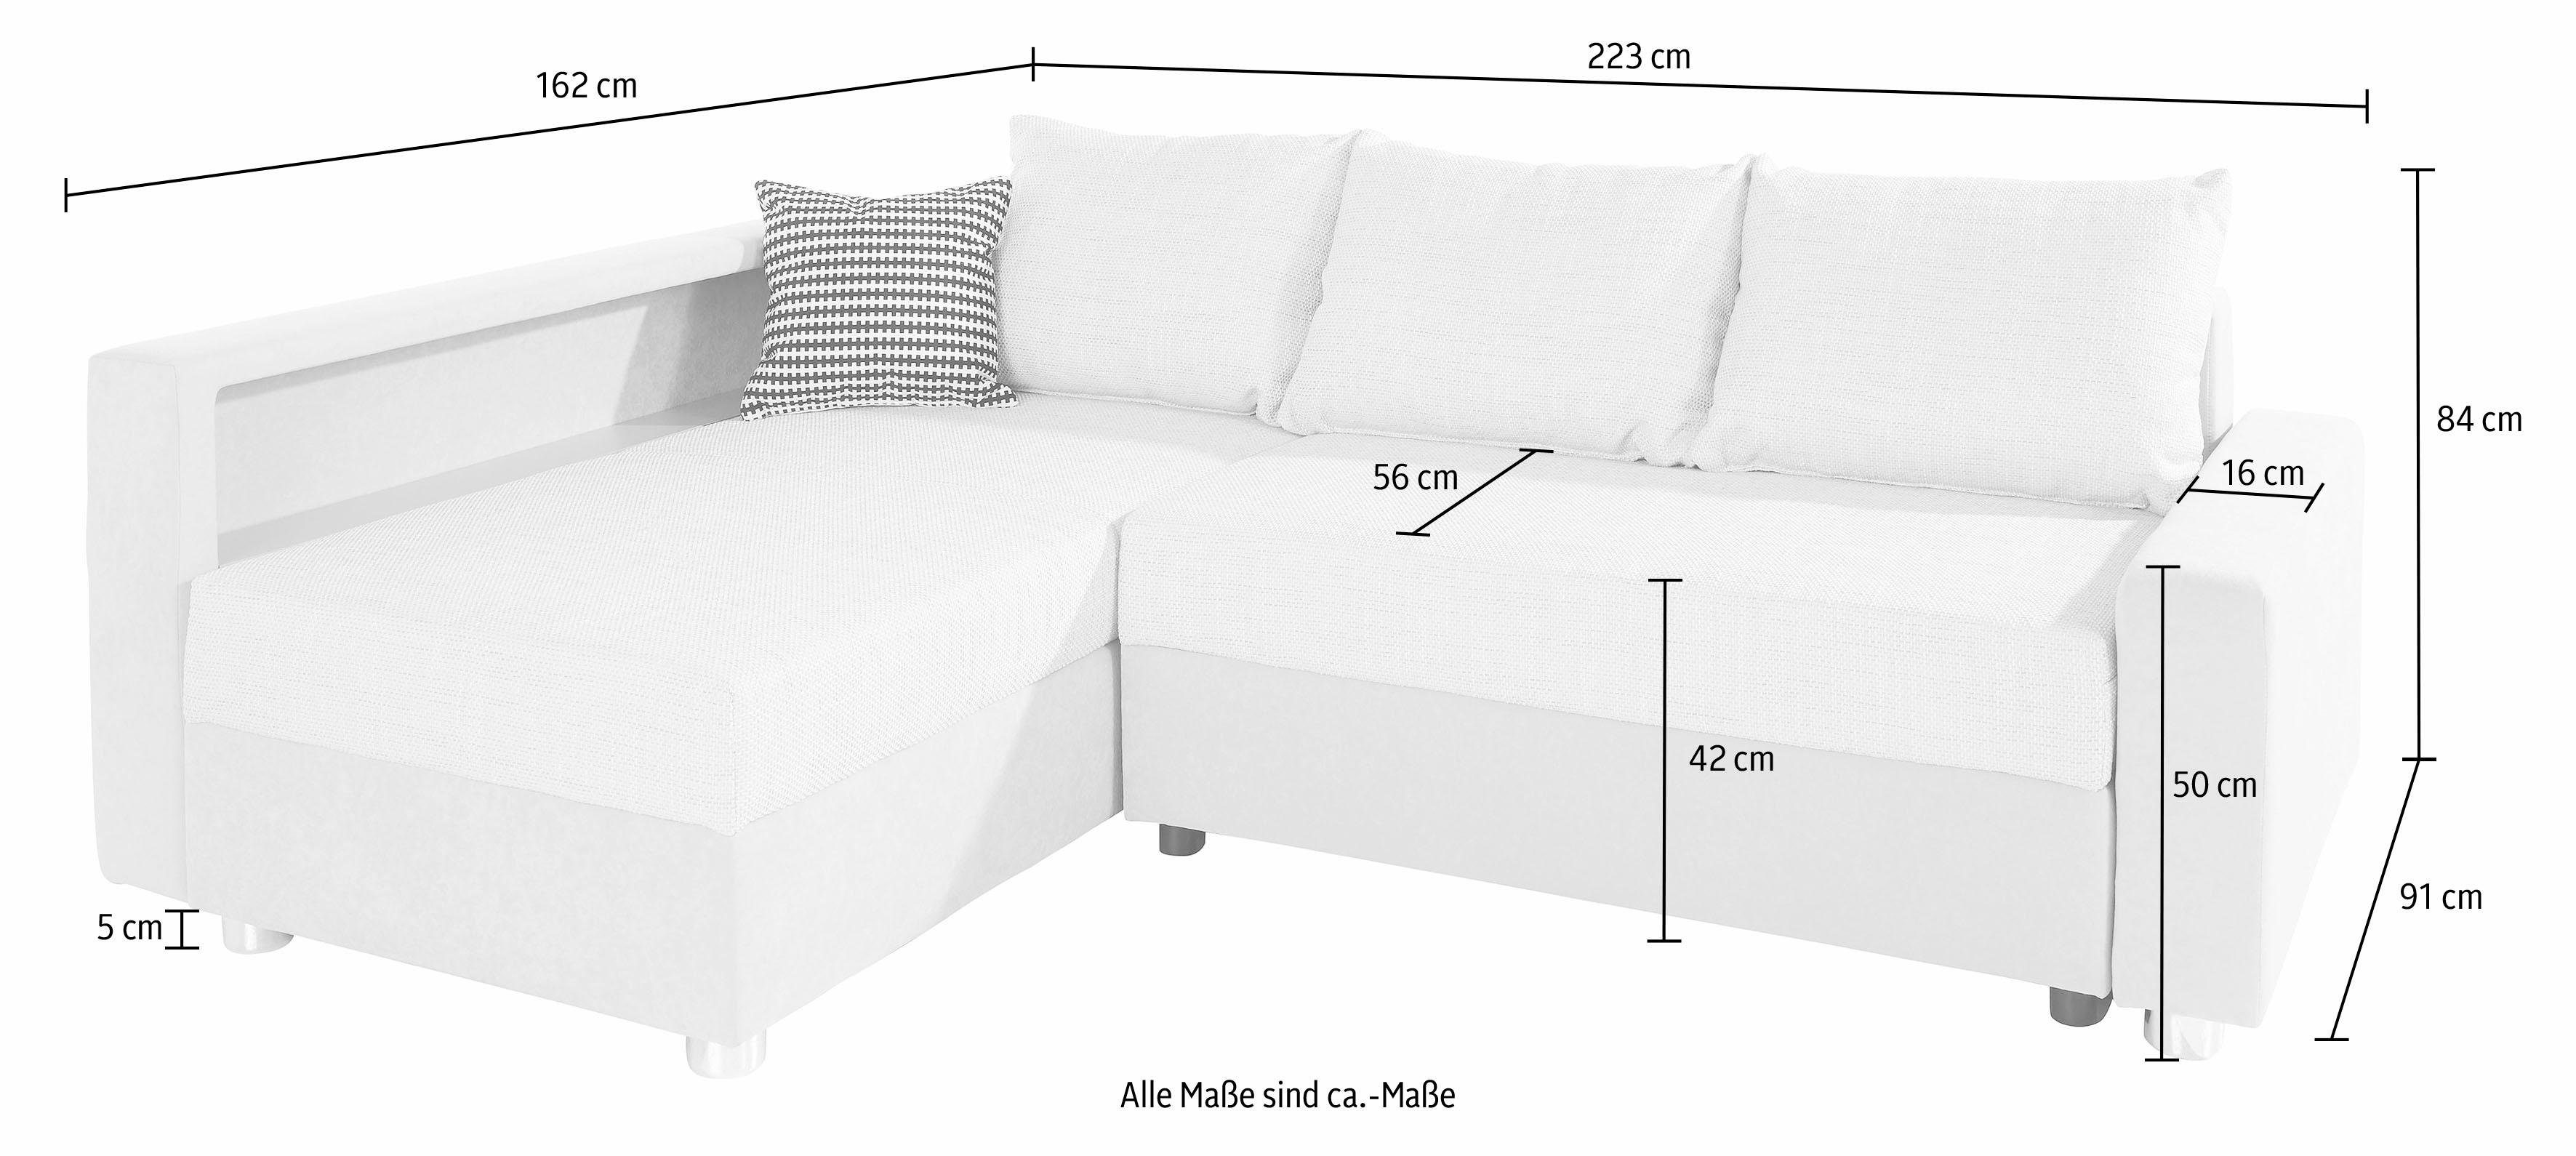 Federkern, inklusive Bettfunktion, Ecksofa wahlweise COLLECTION Relax, RGB-LED-Beleuchtung AB mit